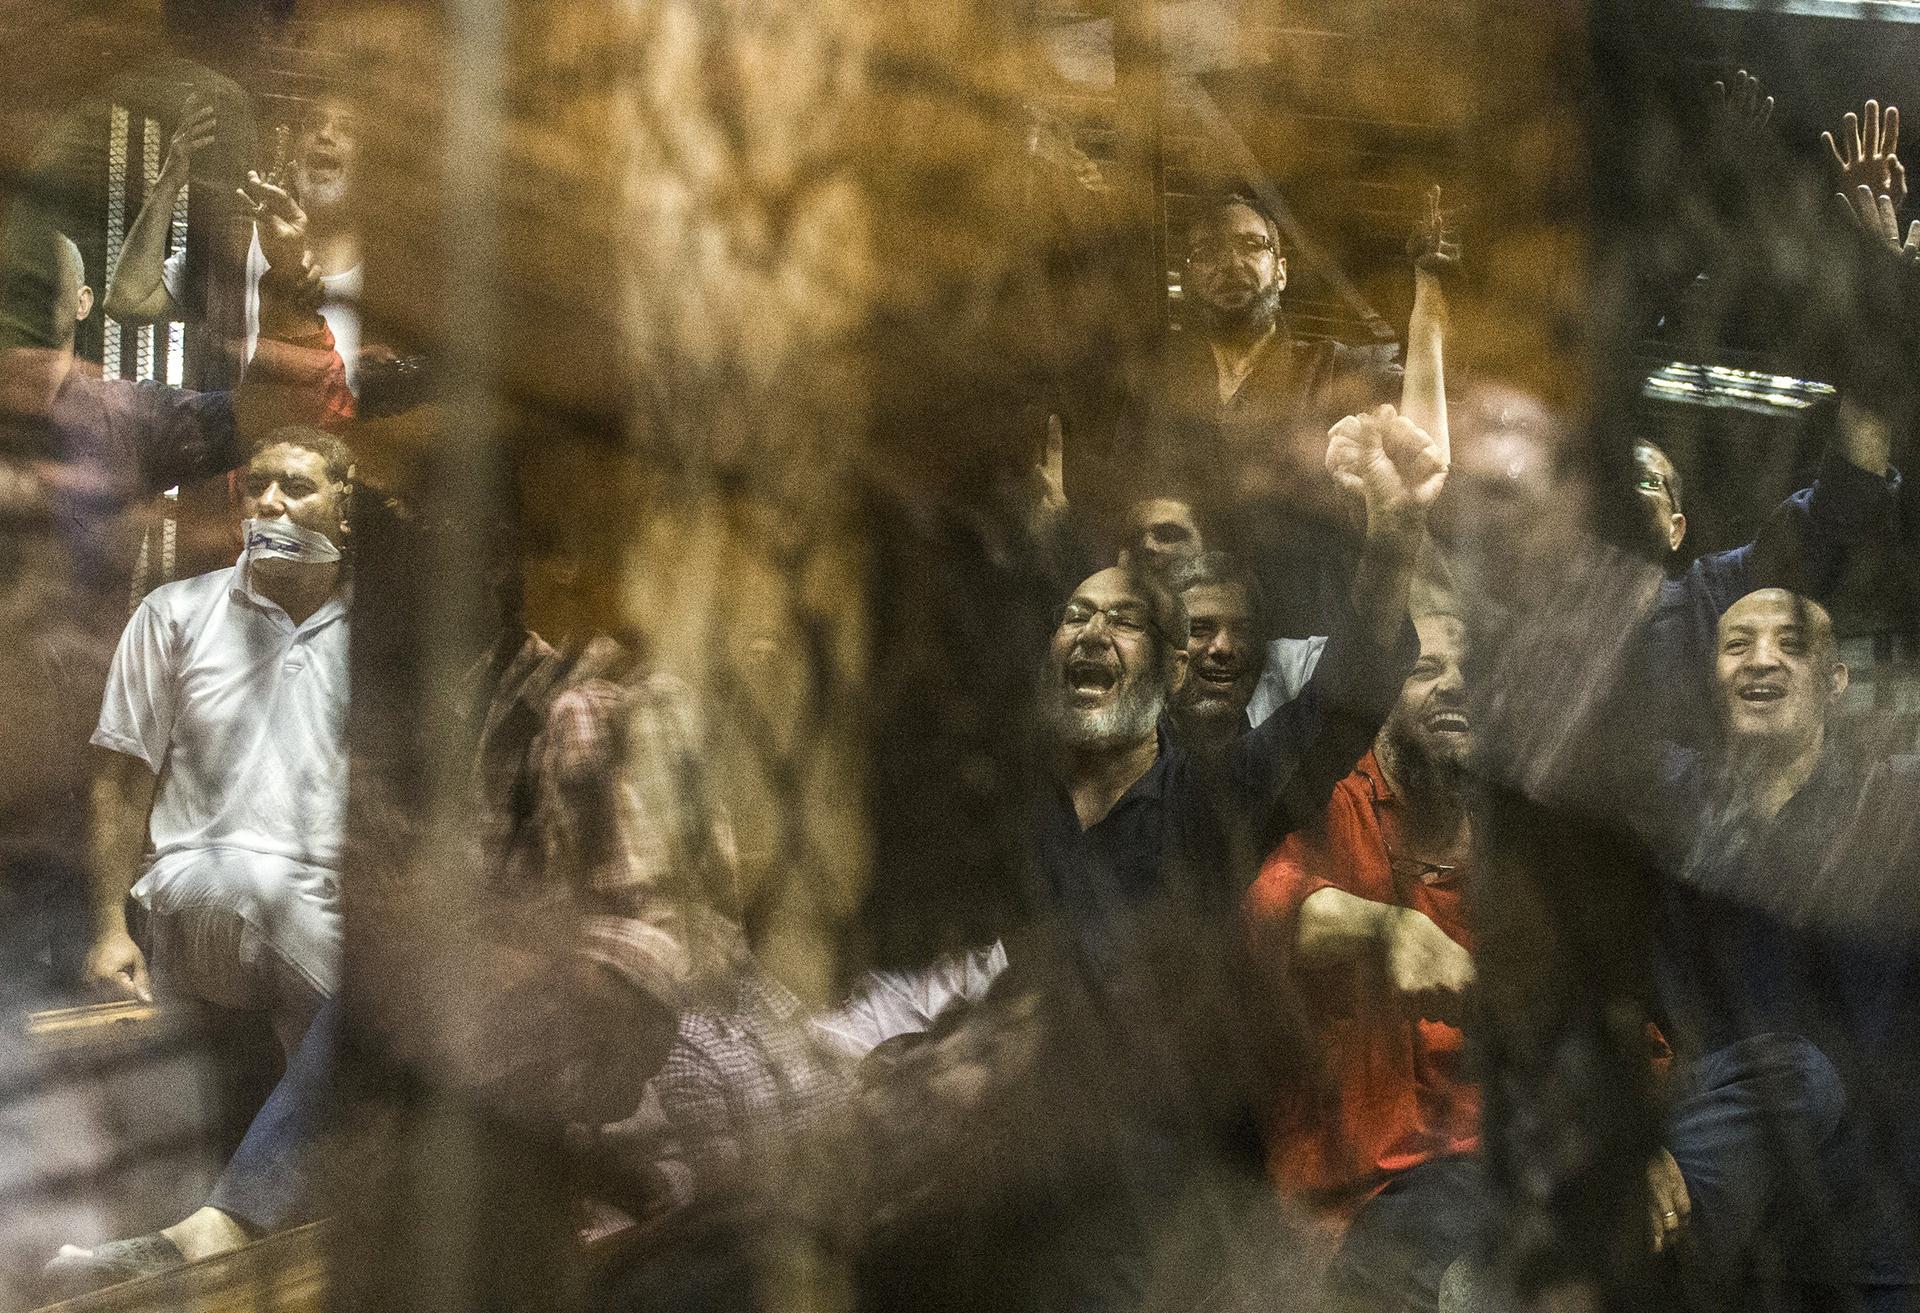 The Muslim Brotherhood's Safwat Hegazy (C) shouts from behind the defendants' cage as a judge reads out the verdict sentencing him and more than 100 other defendants to death on May 16, 2015 at the police academy in Cairo.